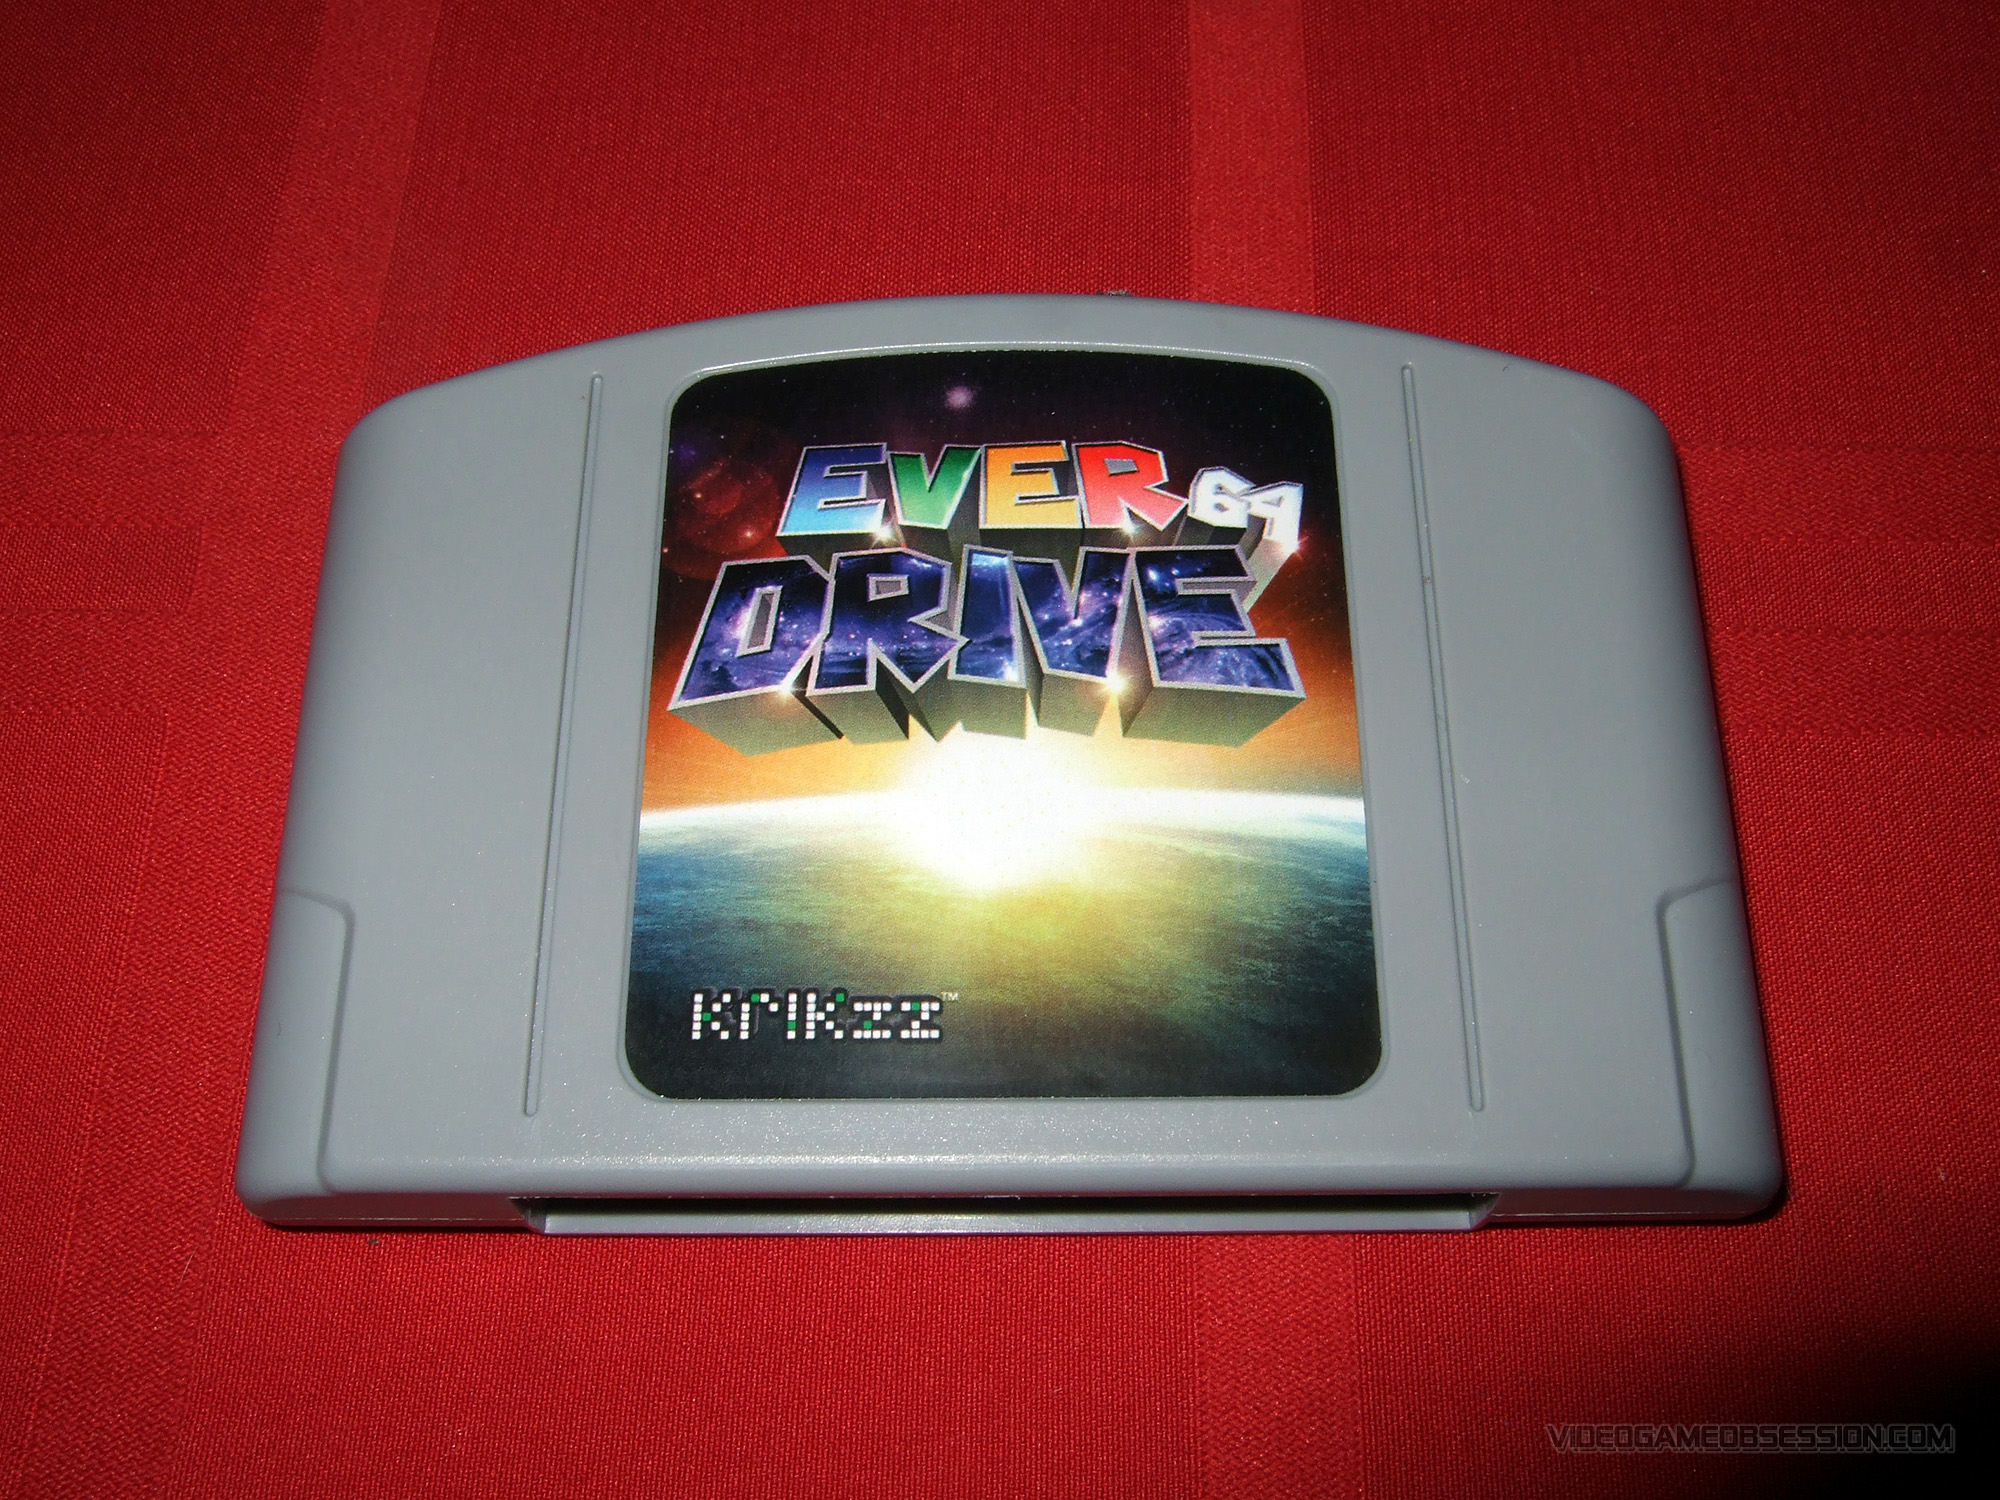 Everdrive 64 @ Video Game Obsession (c) 1996 - (current)